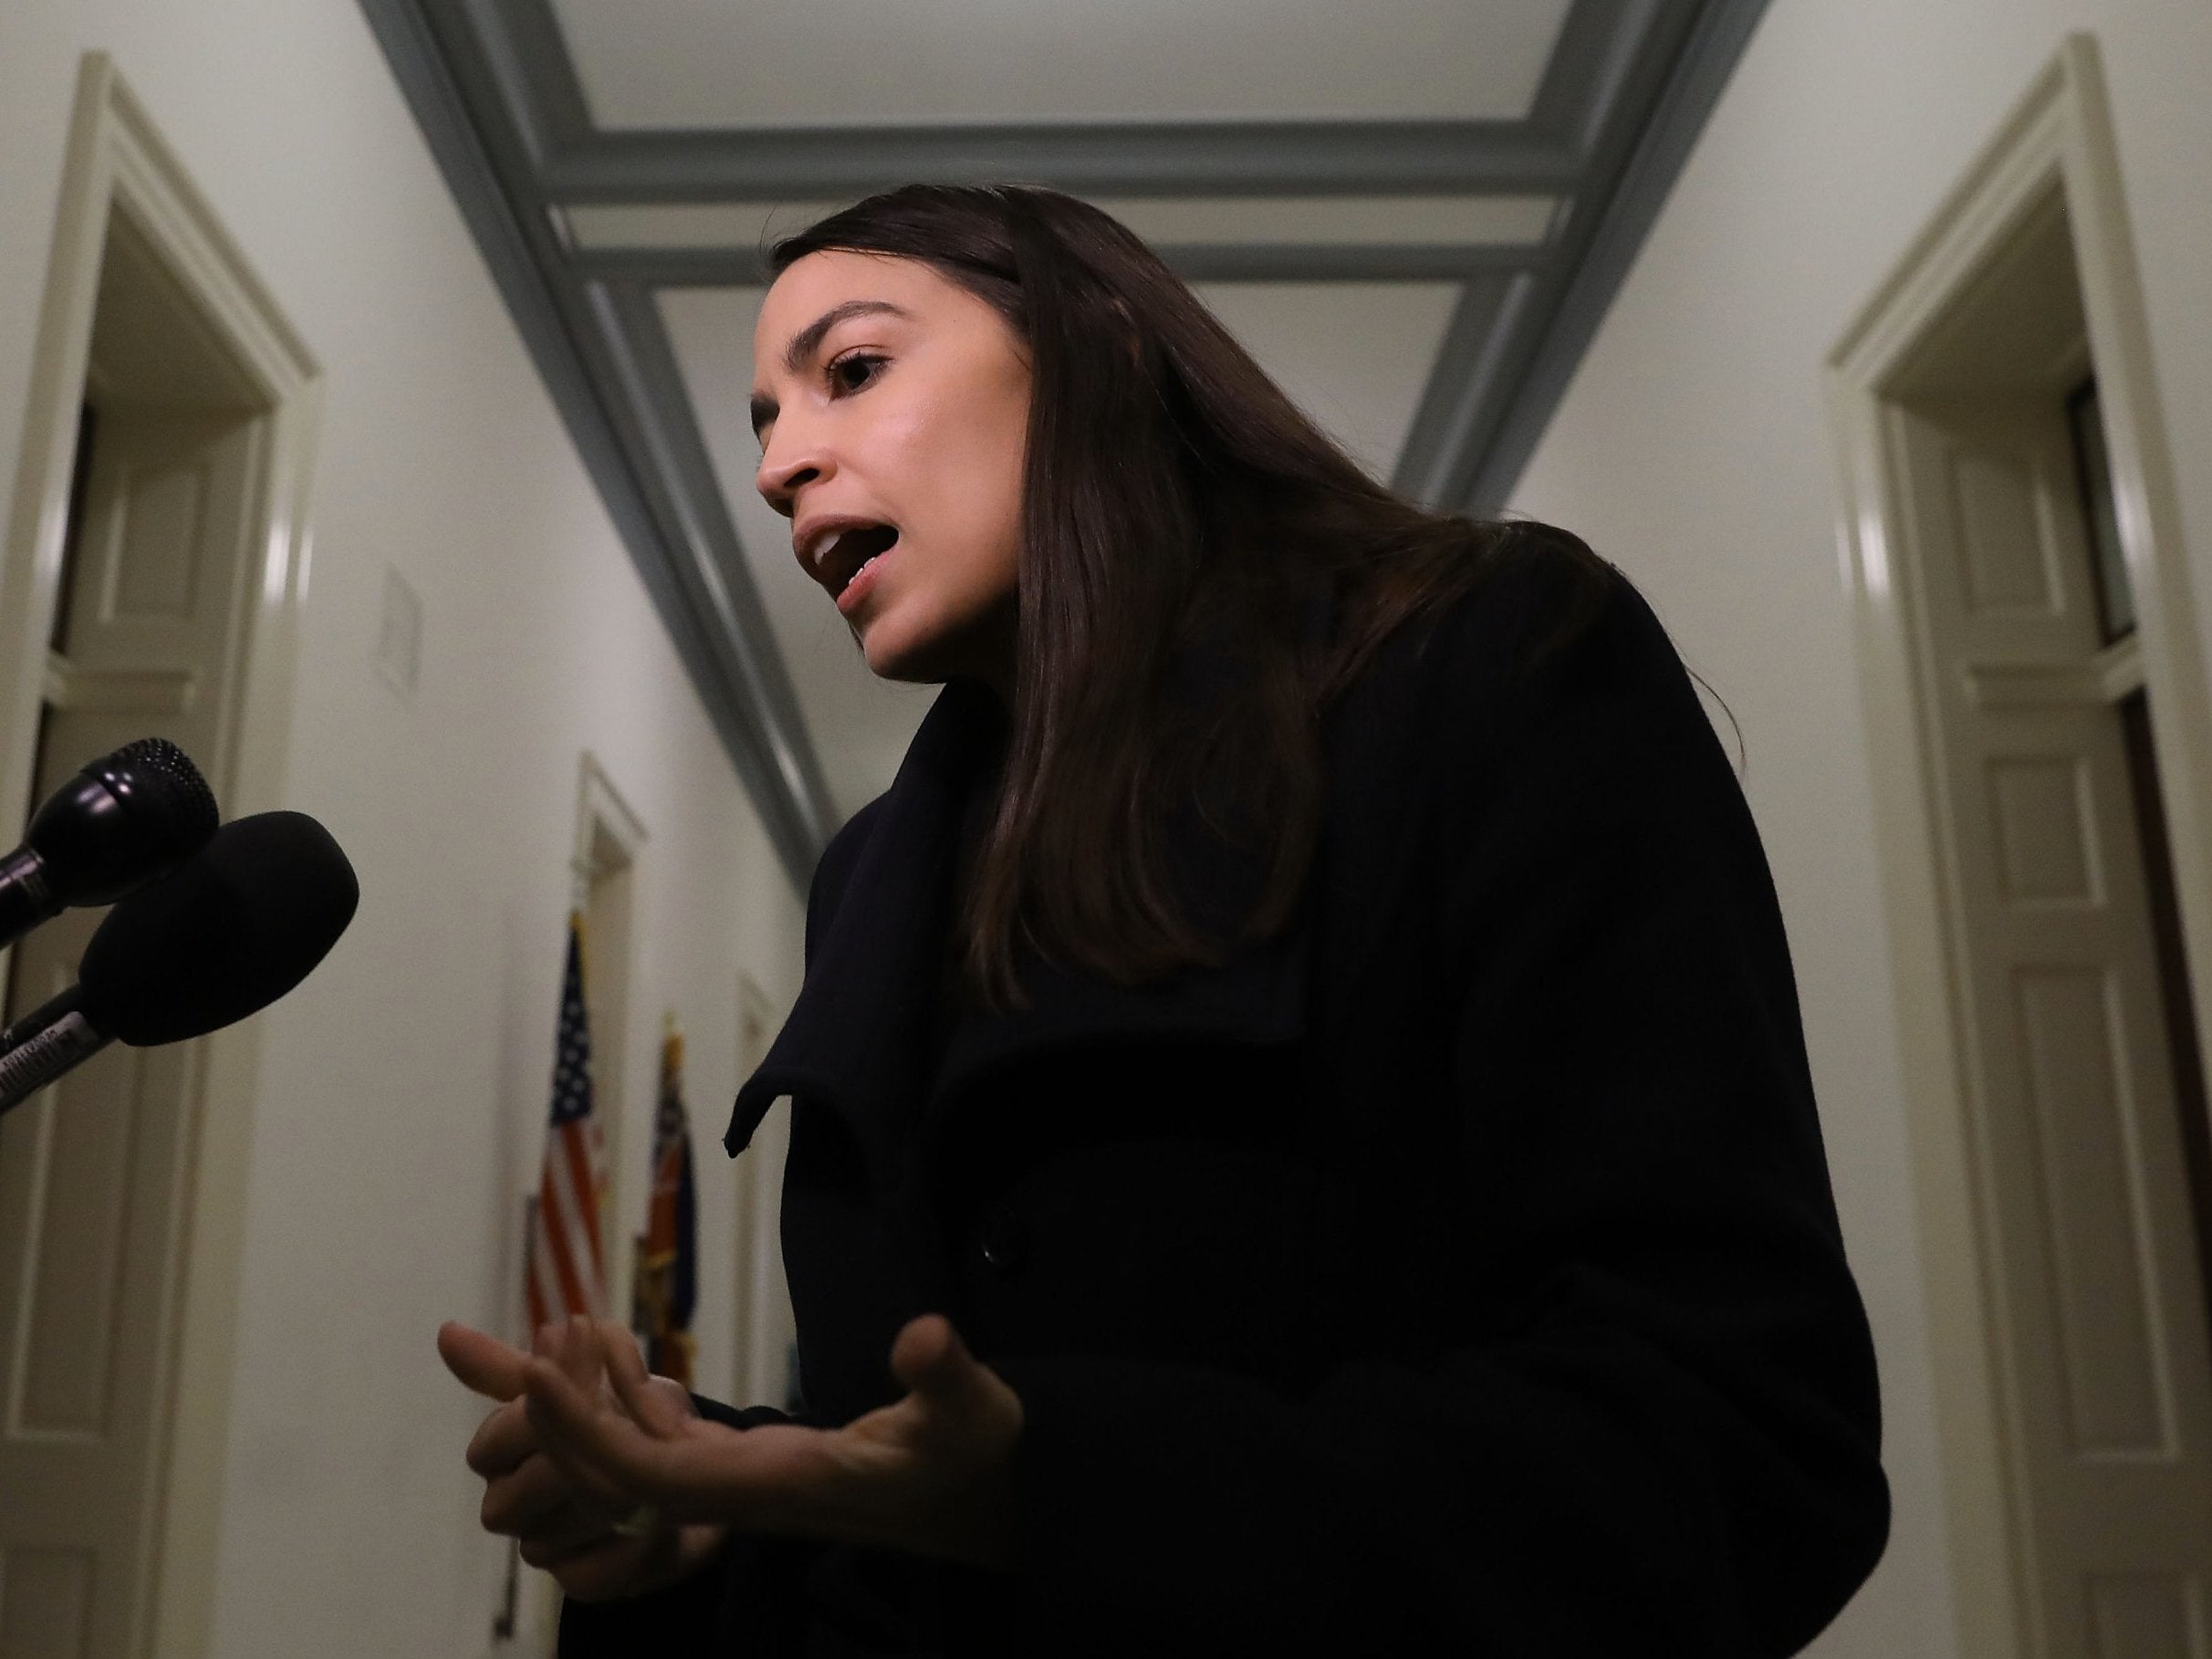 Alexandria Ocasio-Cortez criticised CNN for appointing a former Trump administration official to be a political editor